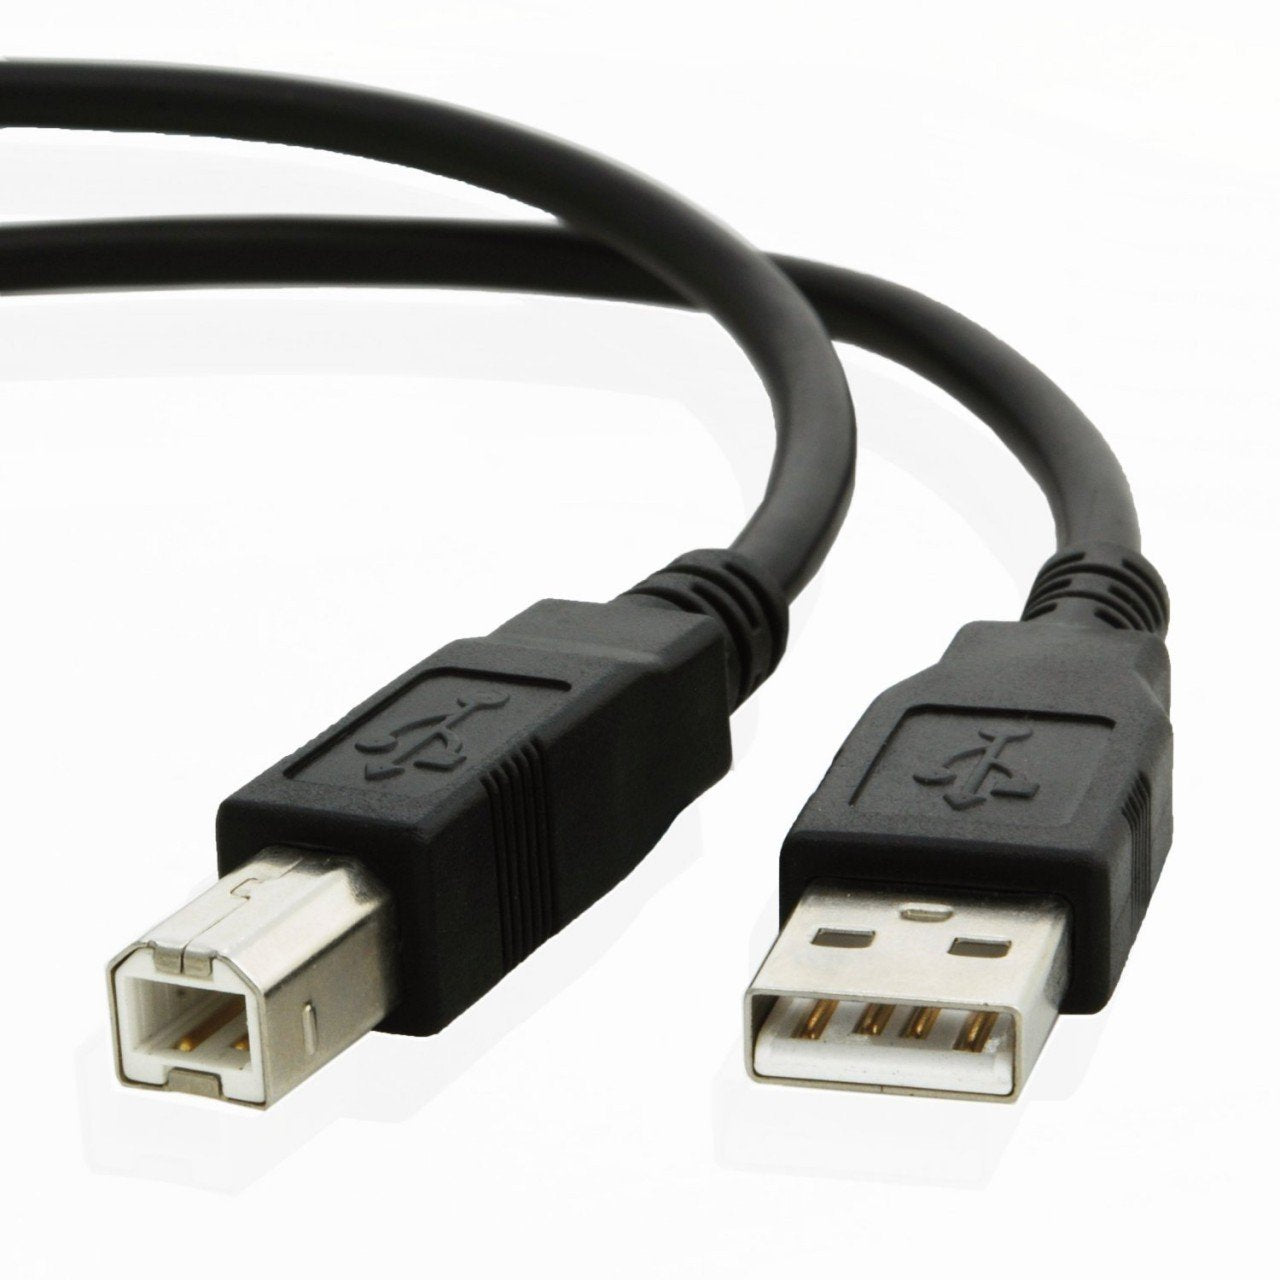 USB cable for Brother MFC-J4320DW